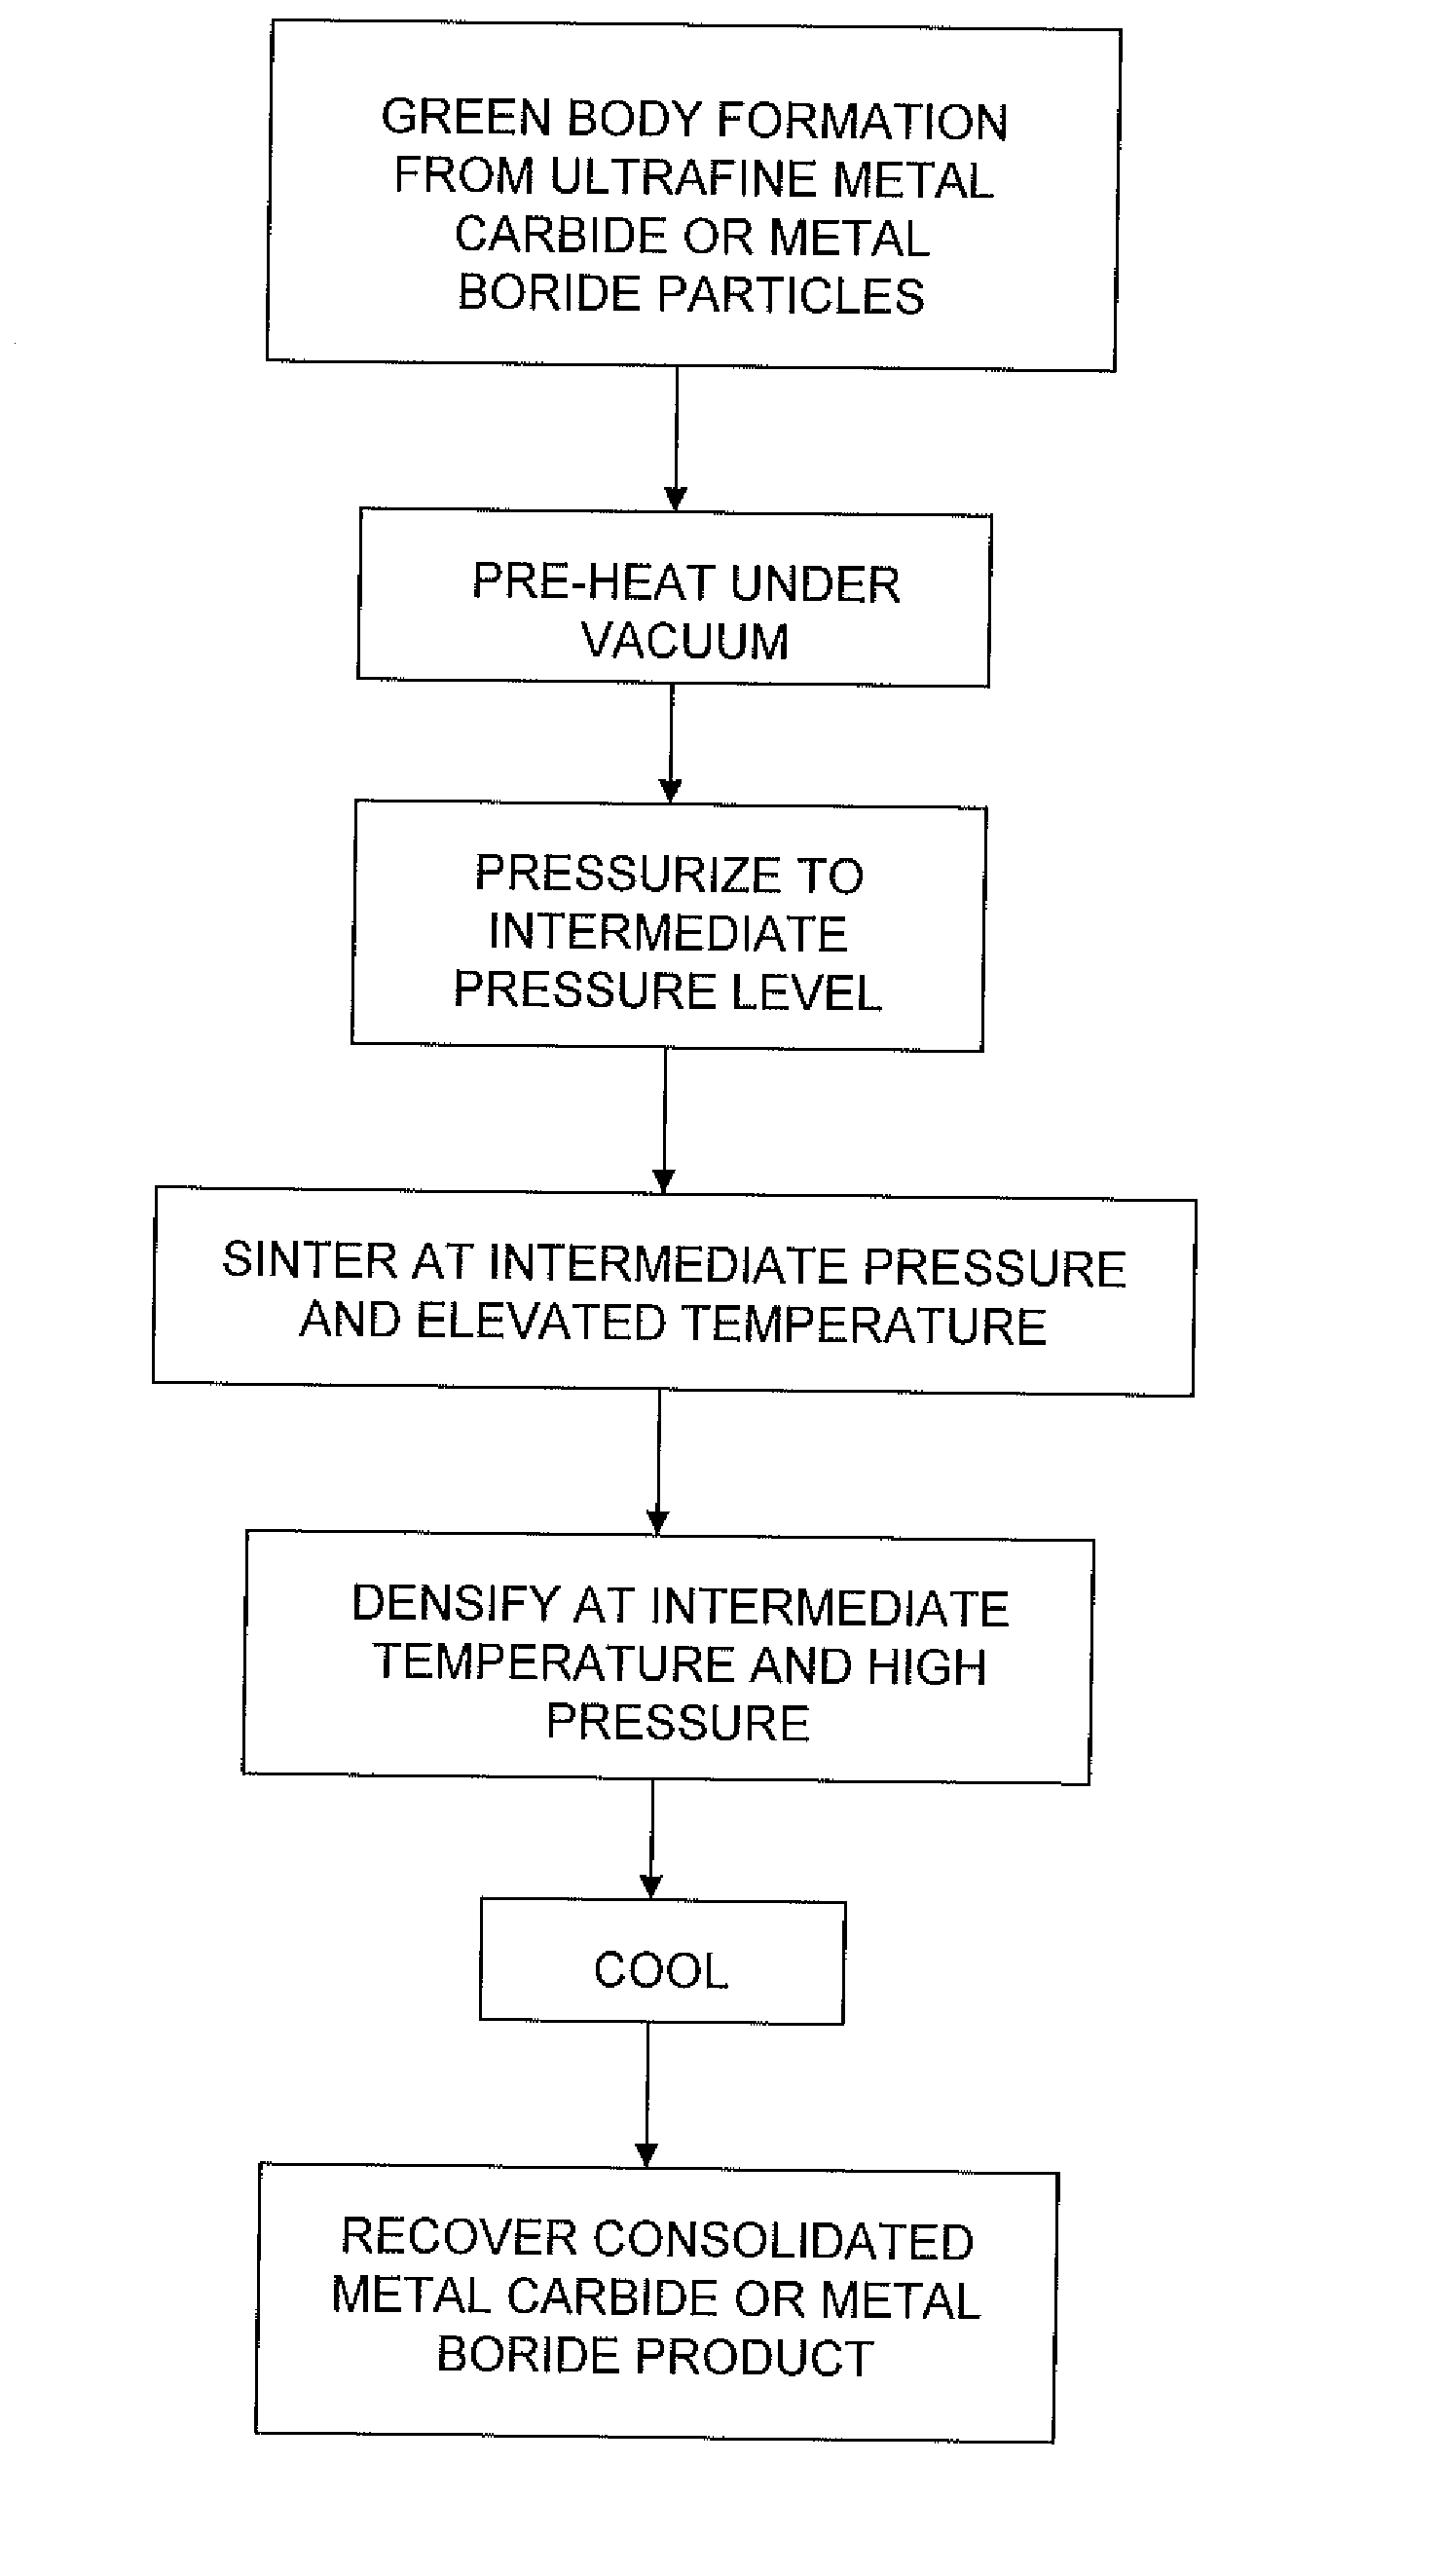 Method of consolidating ultrafine metal carbide and metal boride particles and products made therefrom